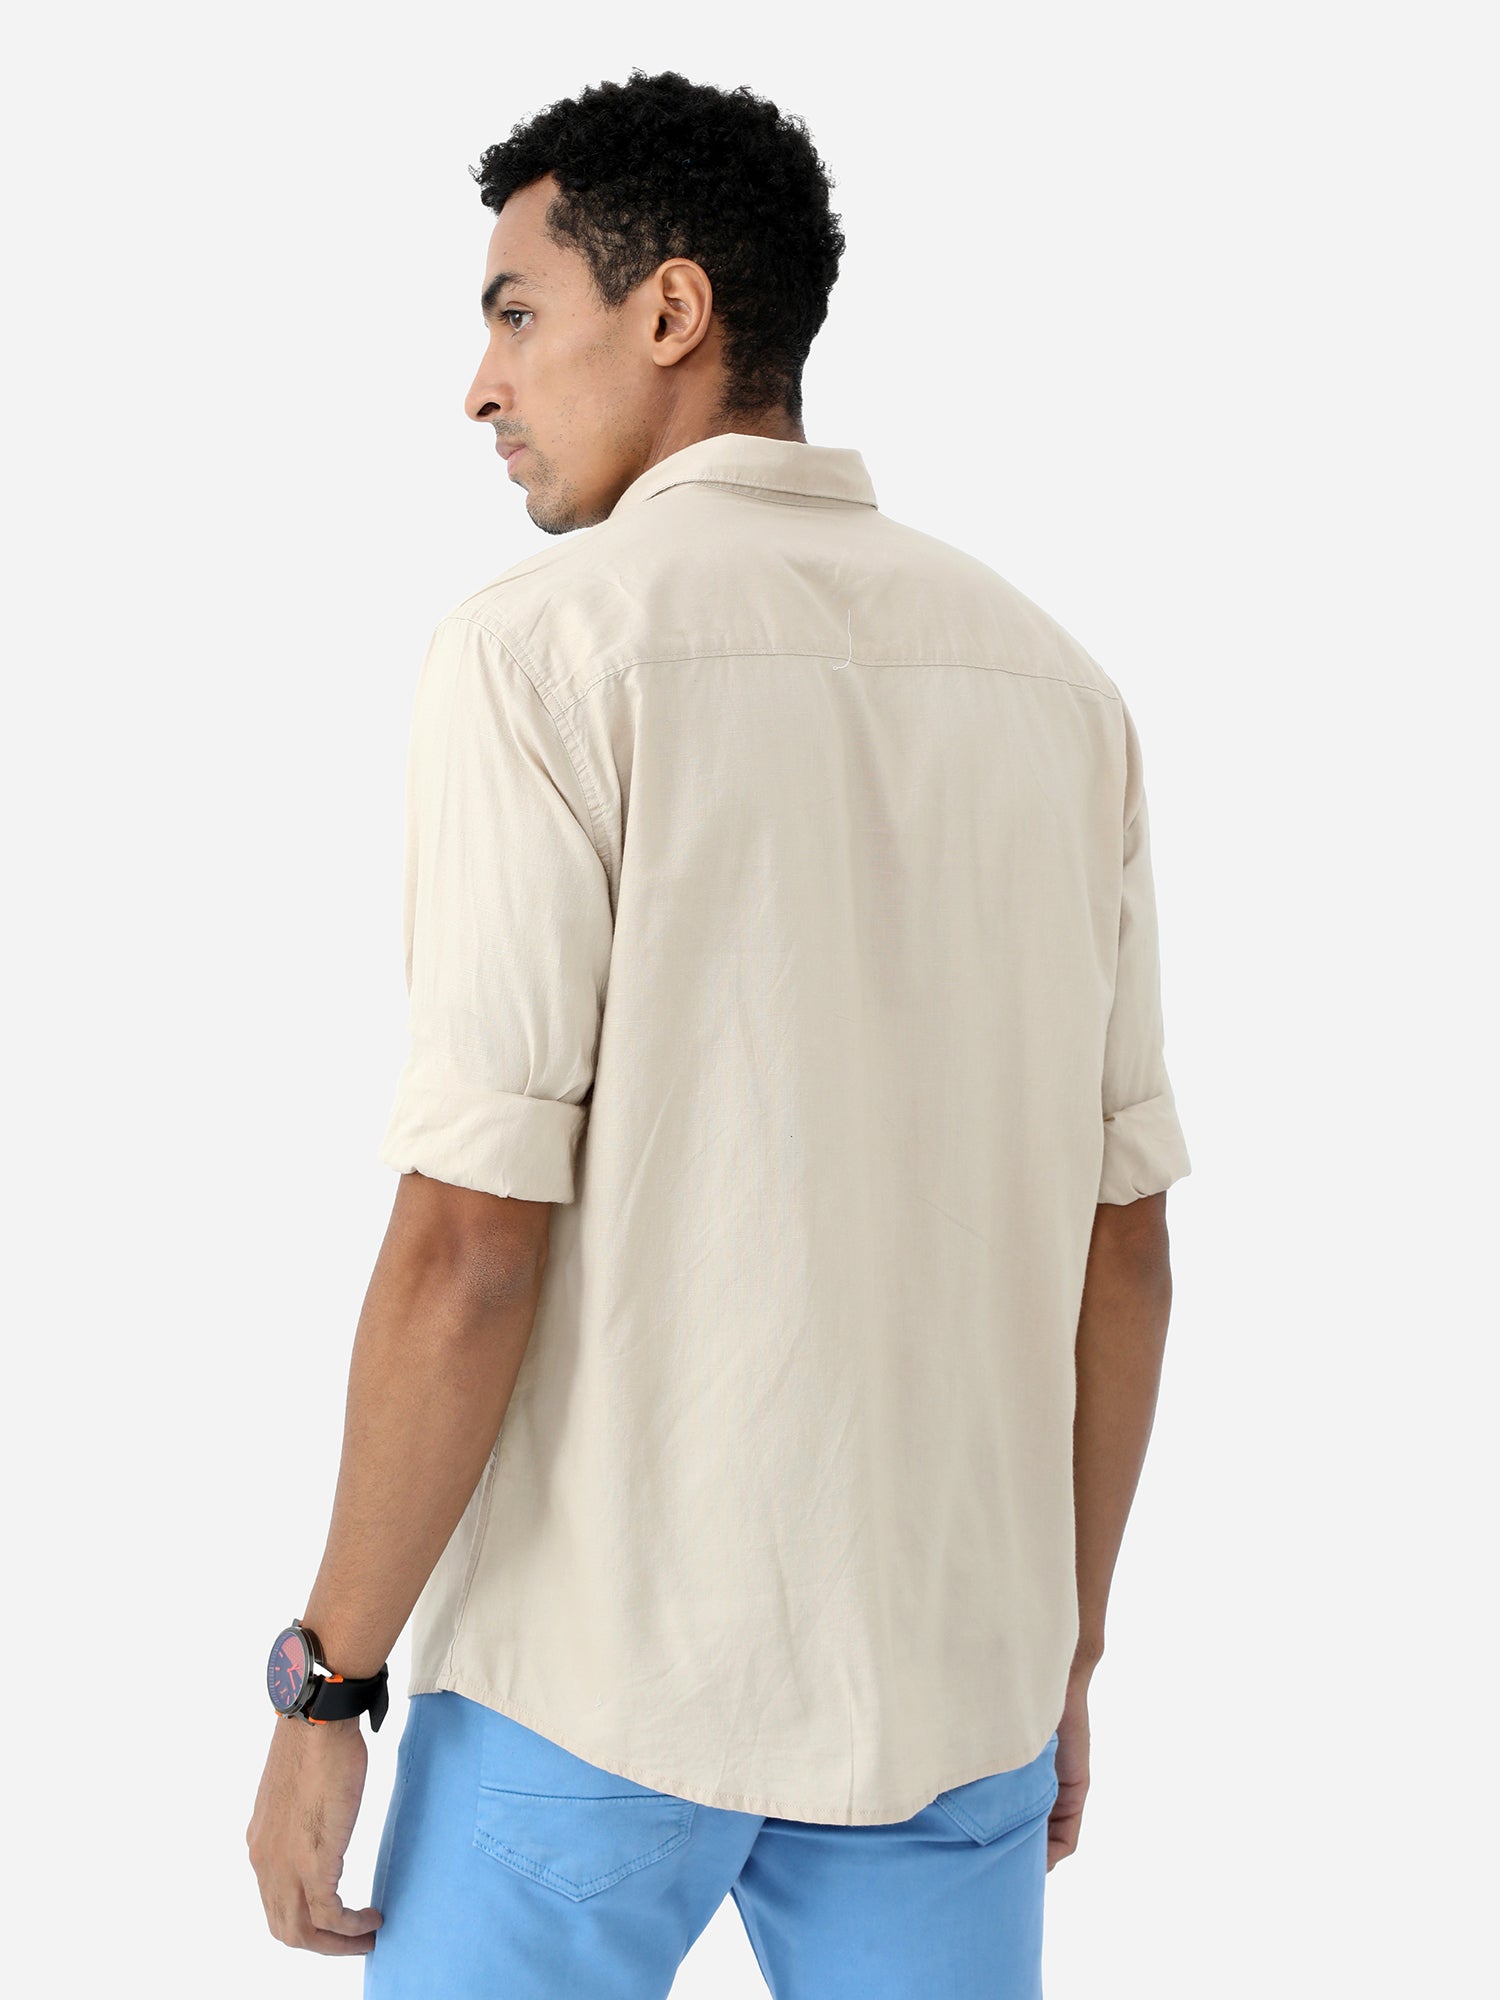 Beige Solid Cotton Full Sleeve Shirt